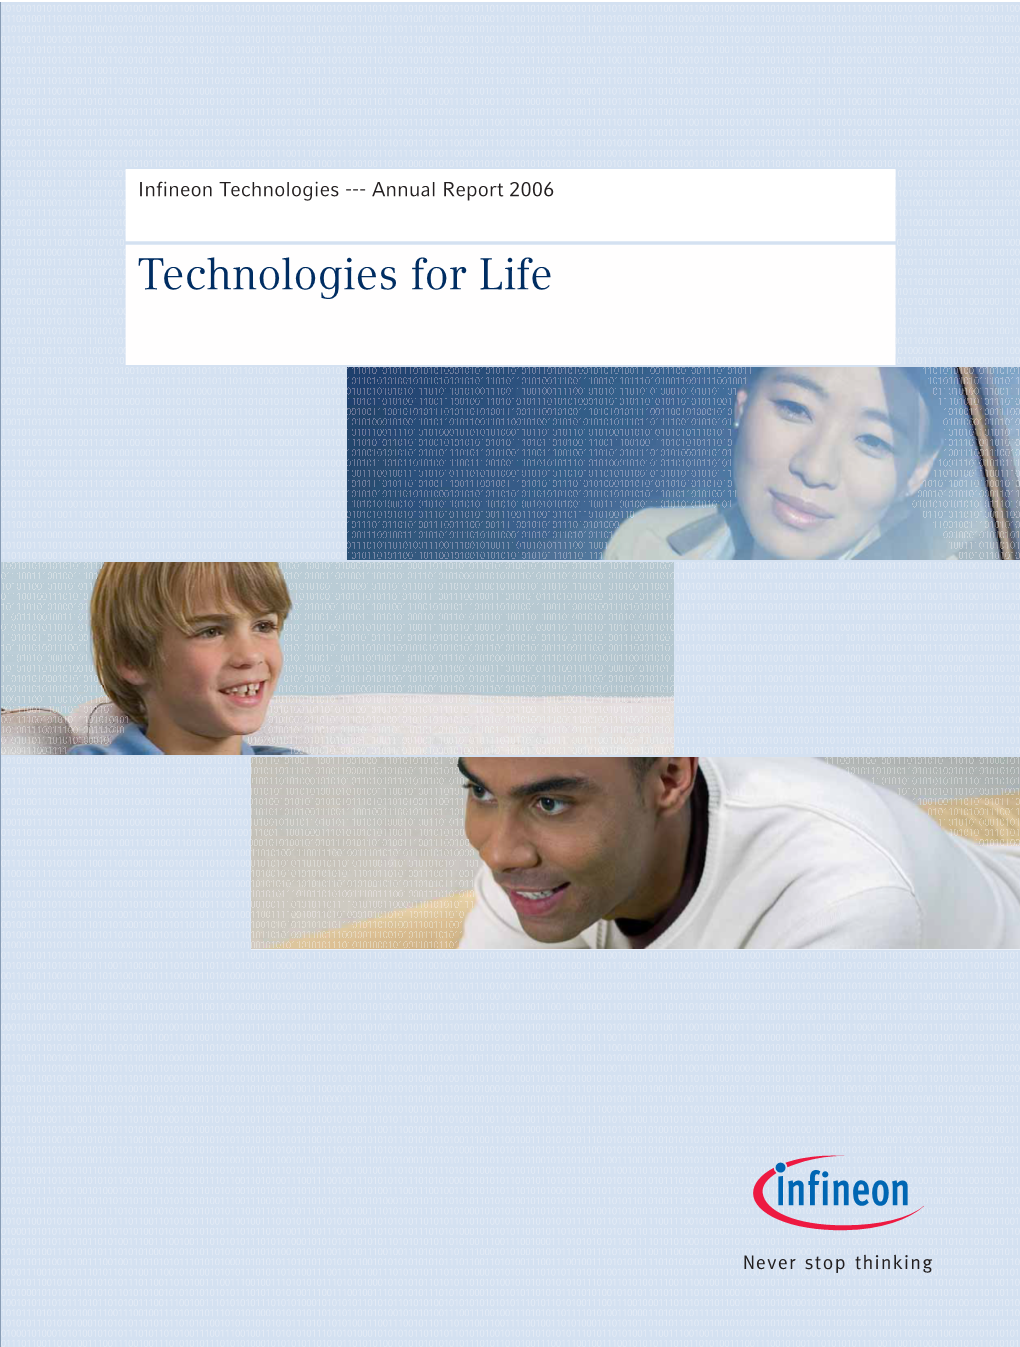 Technologies for Life